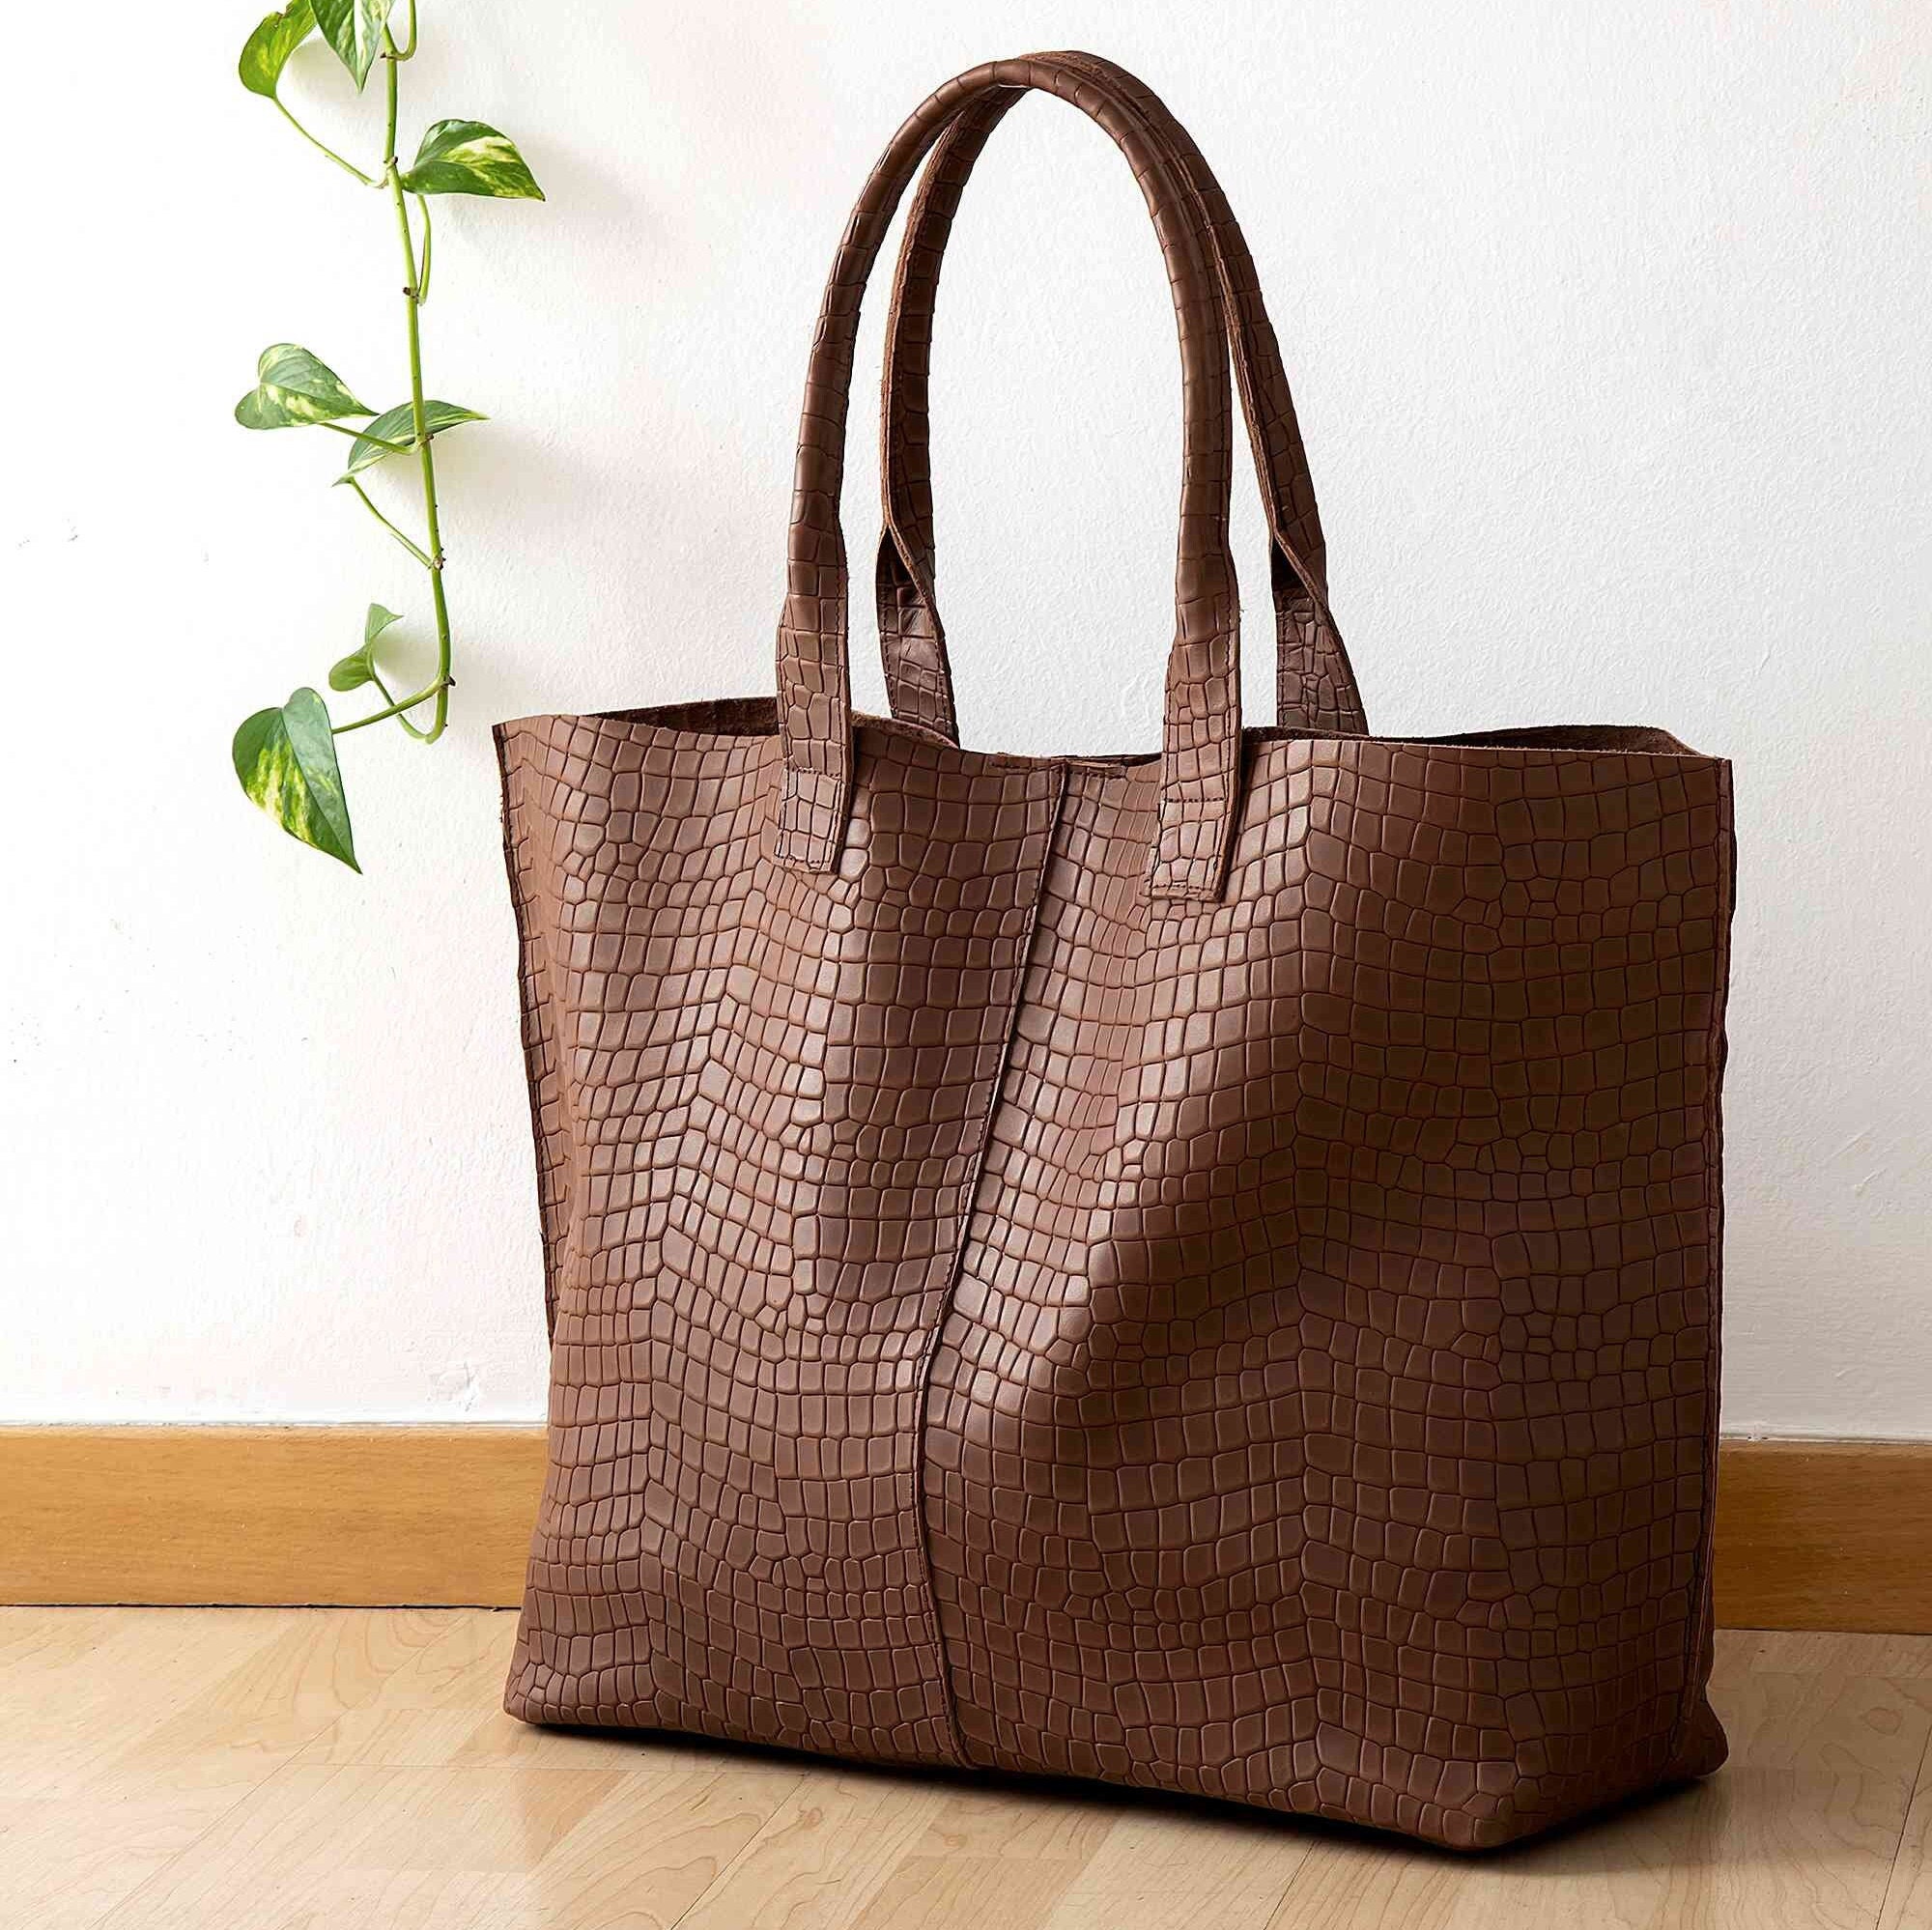 Brown Leather Tote Bag, Croc Bag, Oversized Real Leather Handbag, Embossed Leather Bag with Crocodile Effect, Gift for Wife